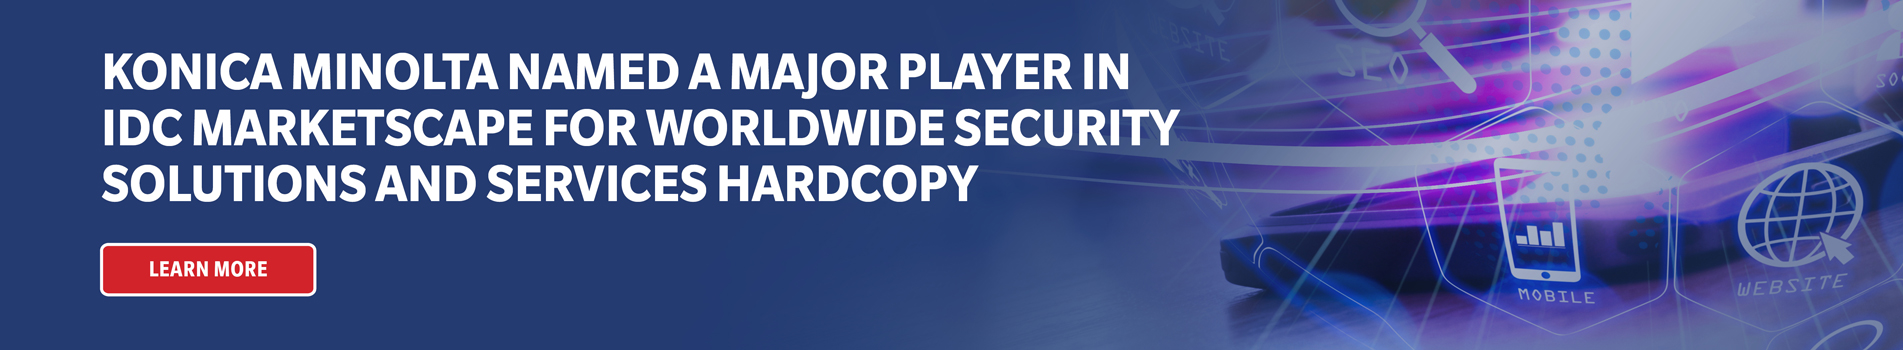 Konica Minolta named a Major Player in IDC MarketScape for Worldwide Security Solutions and Services Hardcopy